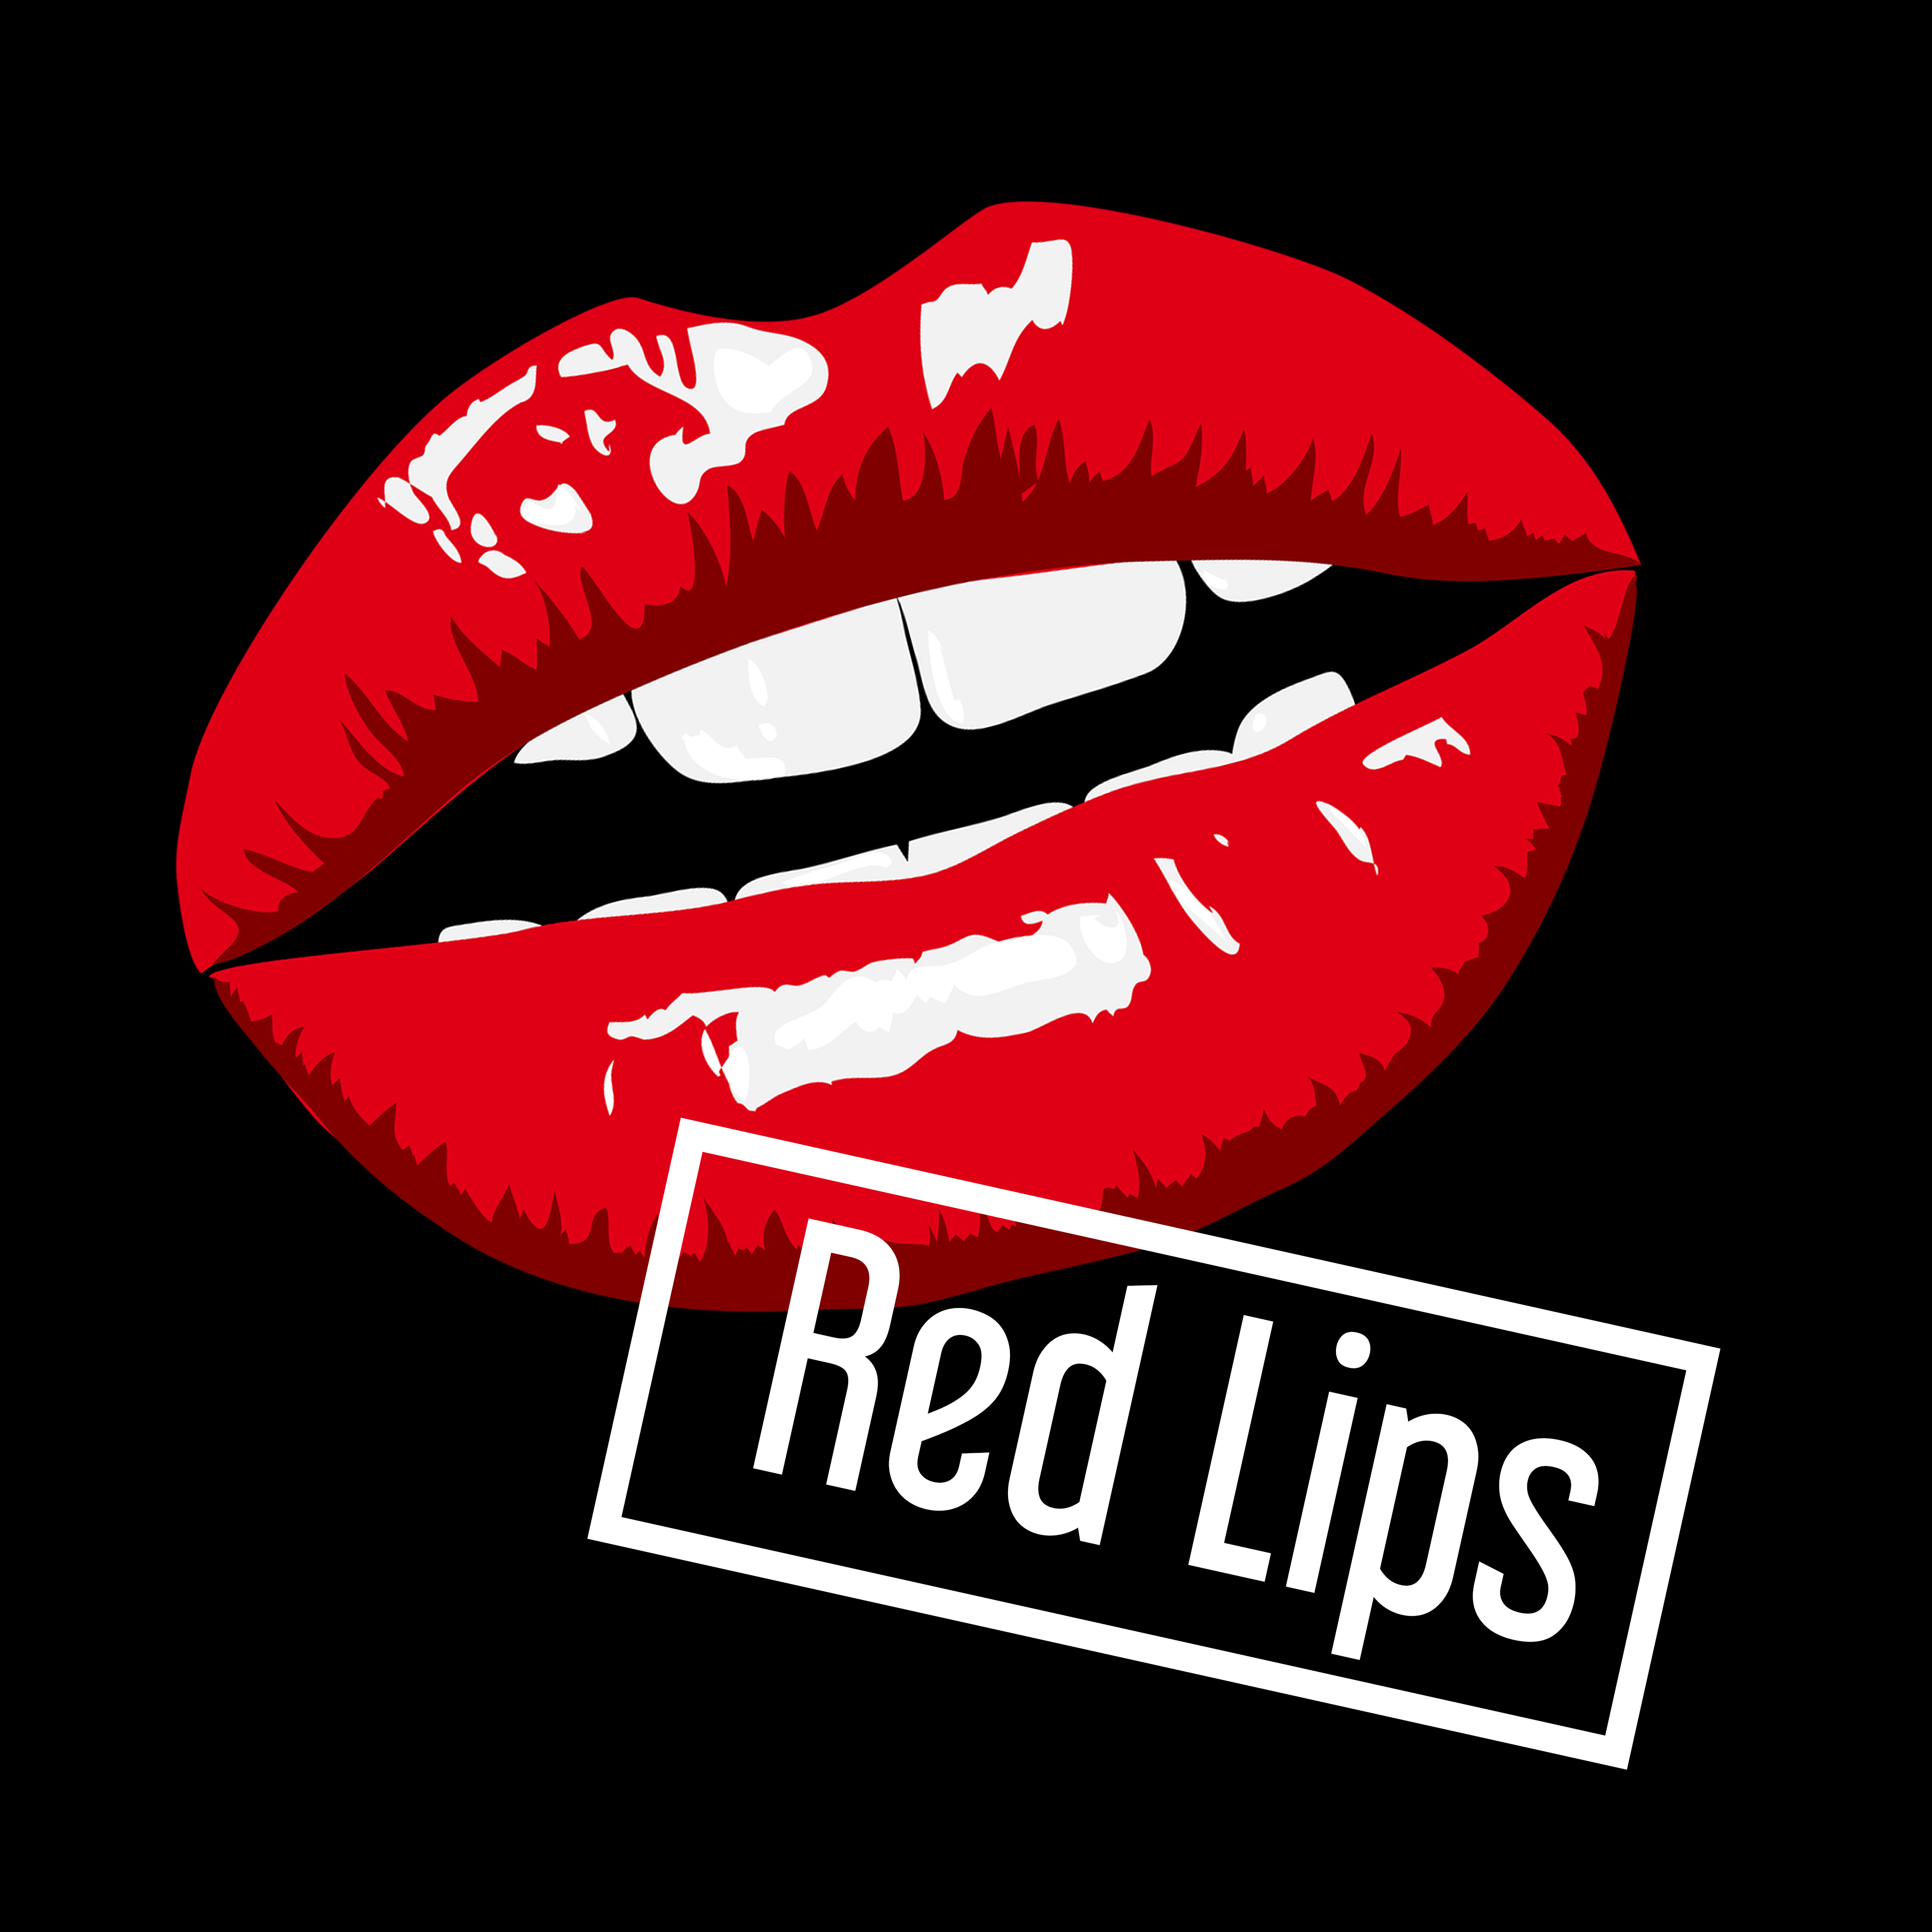 Red Lips – Sensual Jazz Music, Romantic Evening, Pure Feeling, Deep Relax for Two, Sexy Jazz Music, Instrumental Sounds at Night